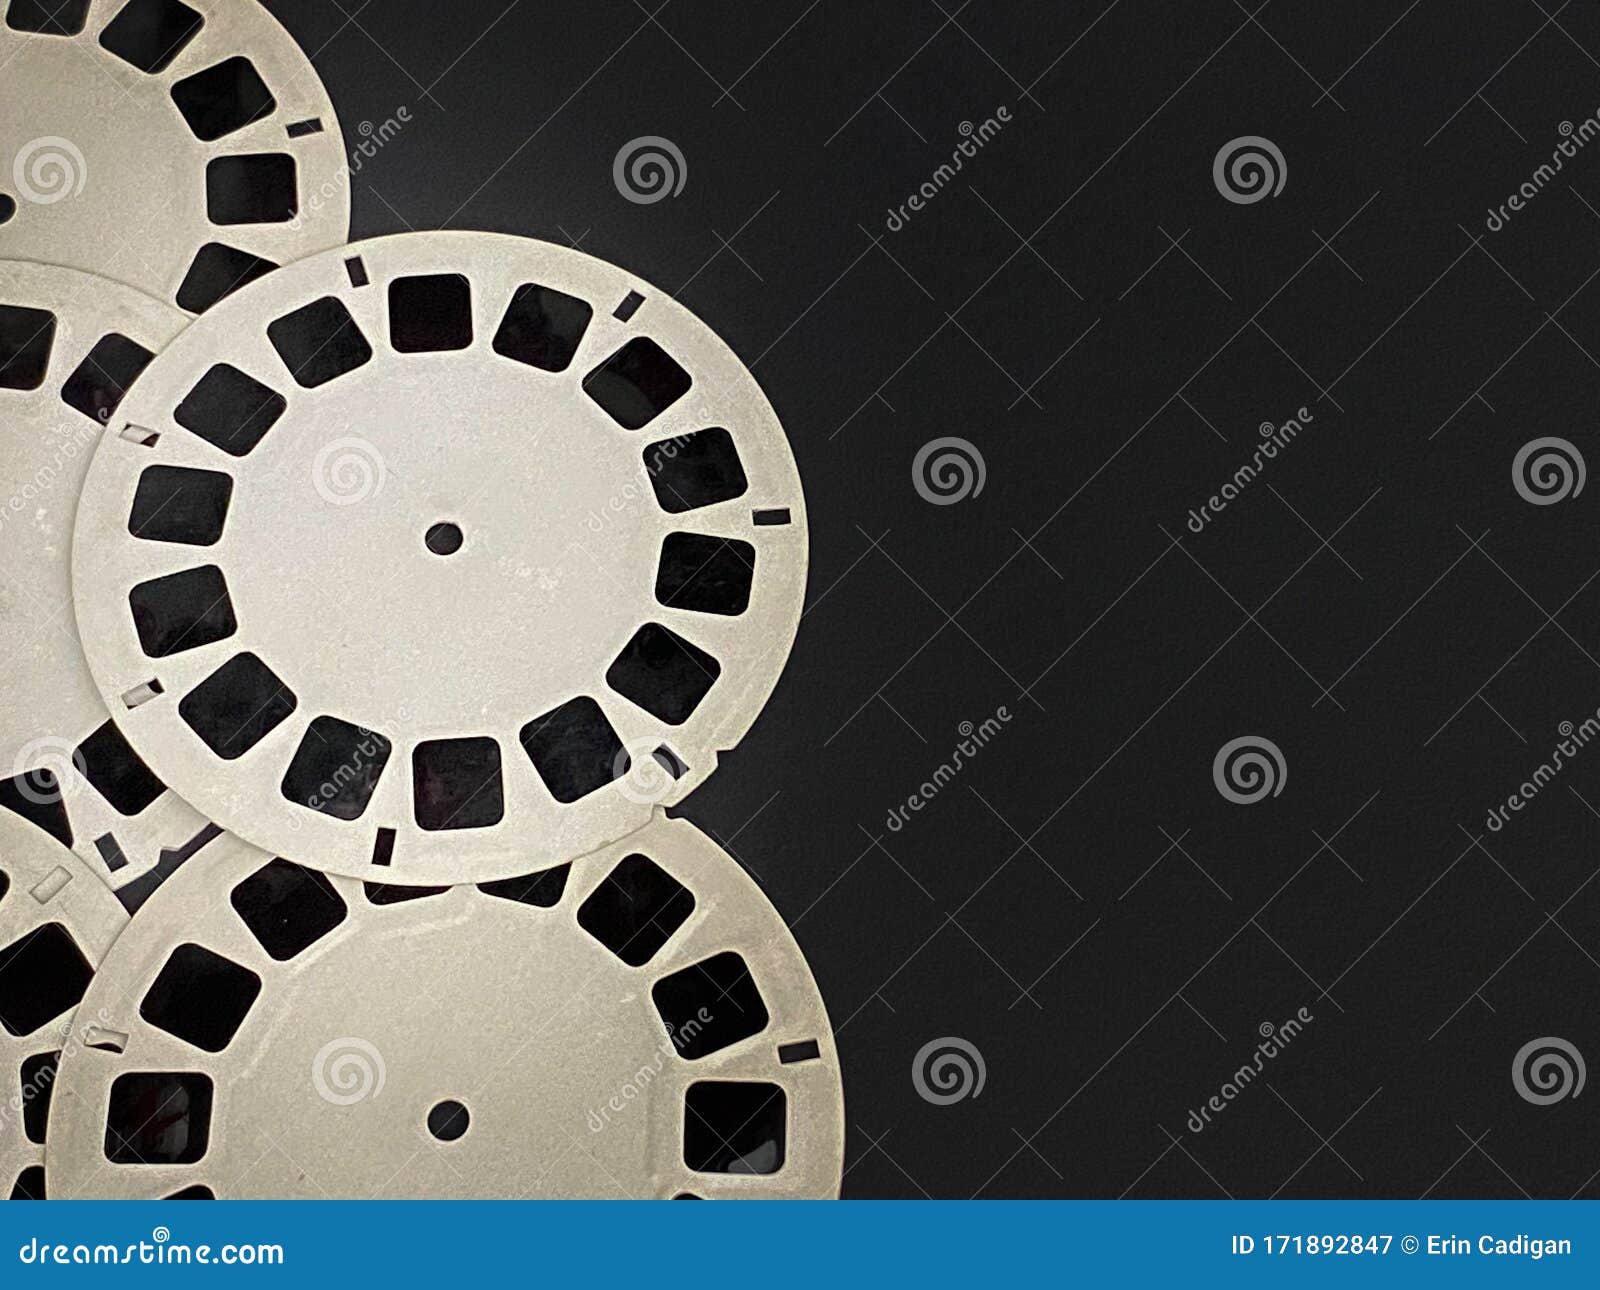 https://thumbs.dreamstime.com/z/vintage-view-master-reels-woodbridge-new-jersey-united-states-january-several-classic-shown-illustrative-editorial-171892847.jpg